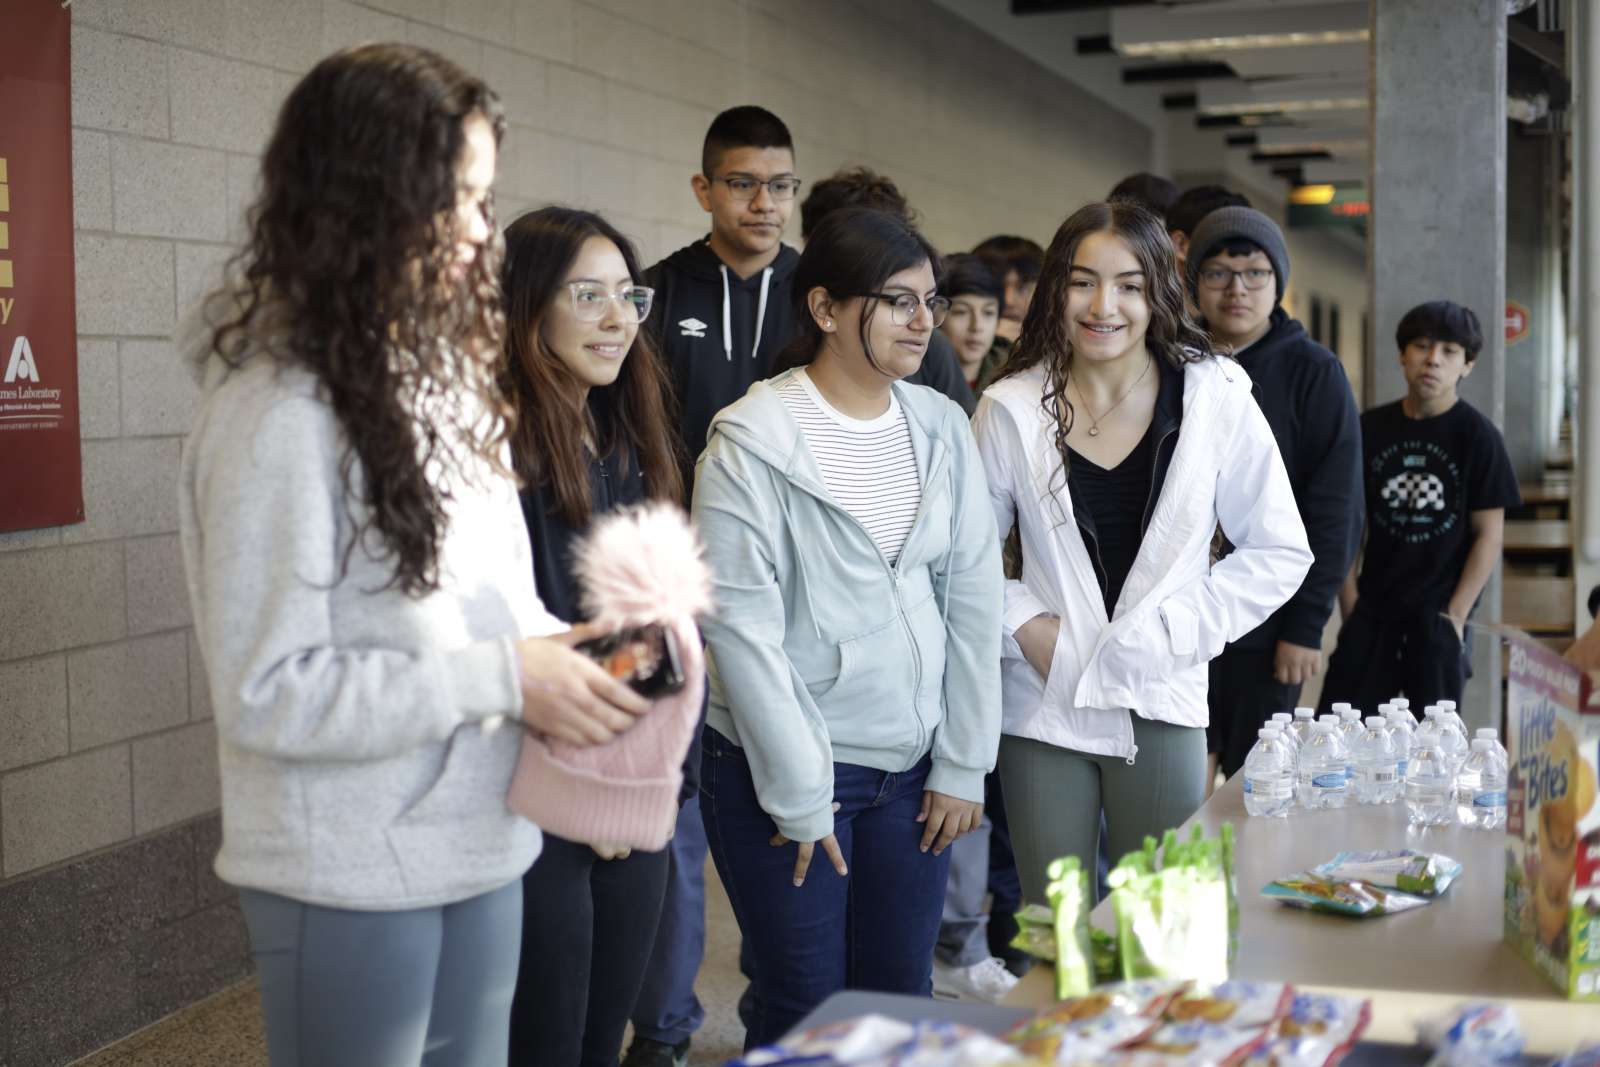 Students in a group getting snacks from a table.